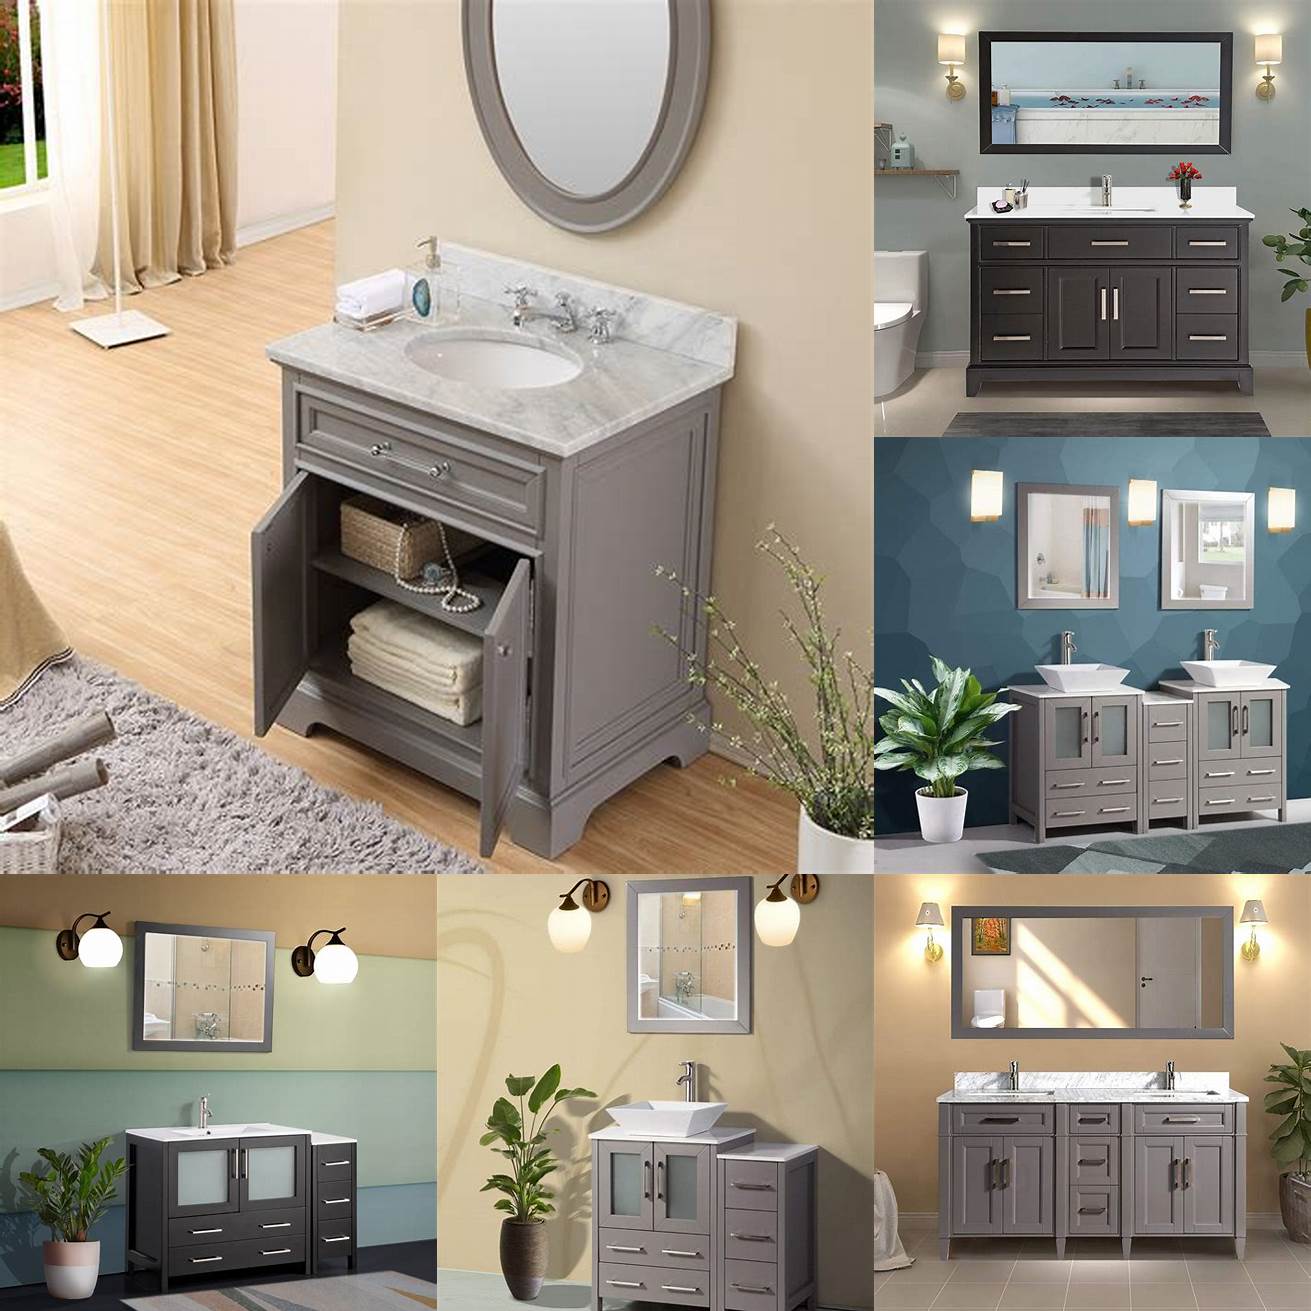 A small bathroom vanity with sink and mirror that provides both functionality and style